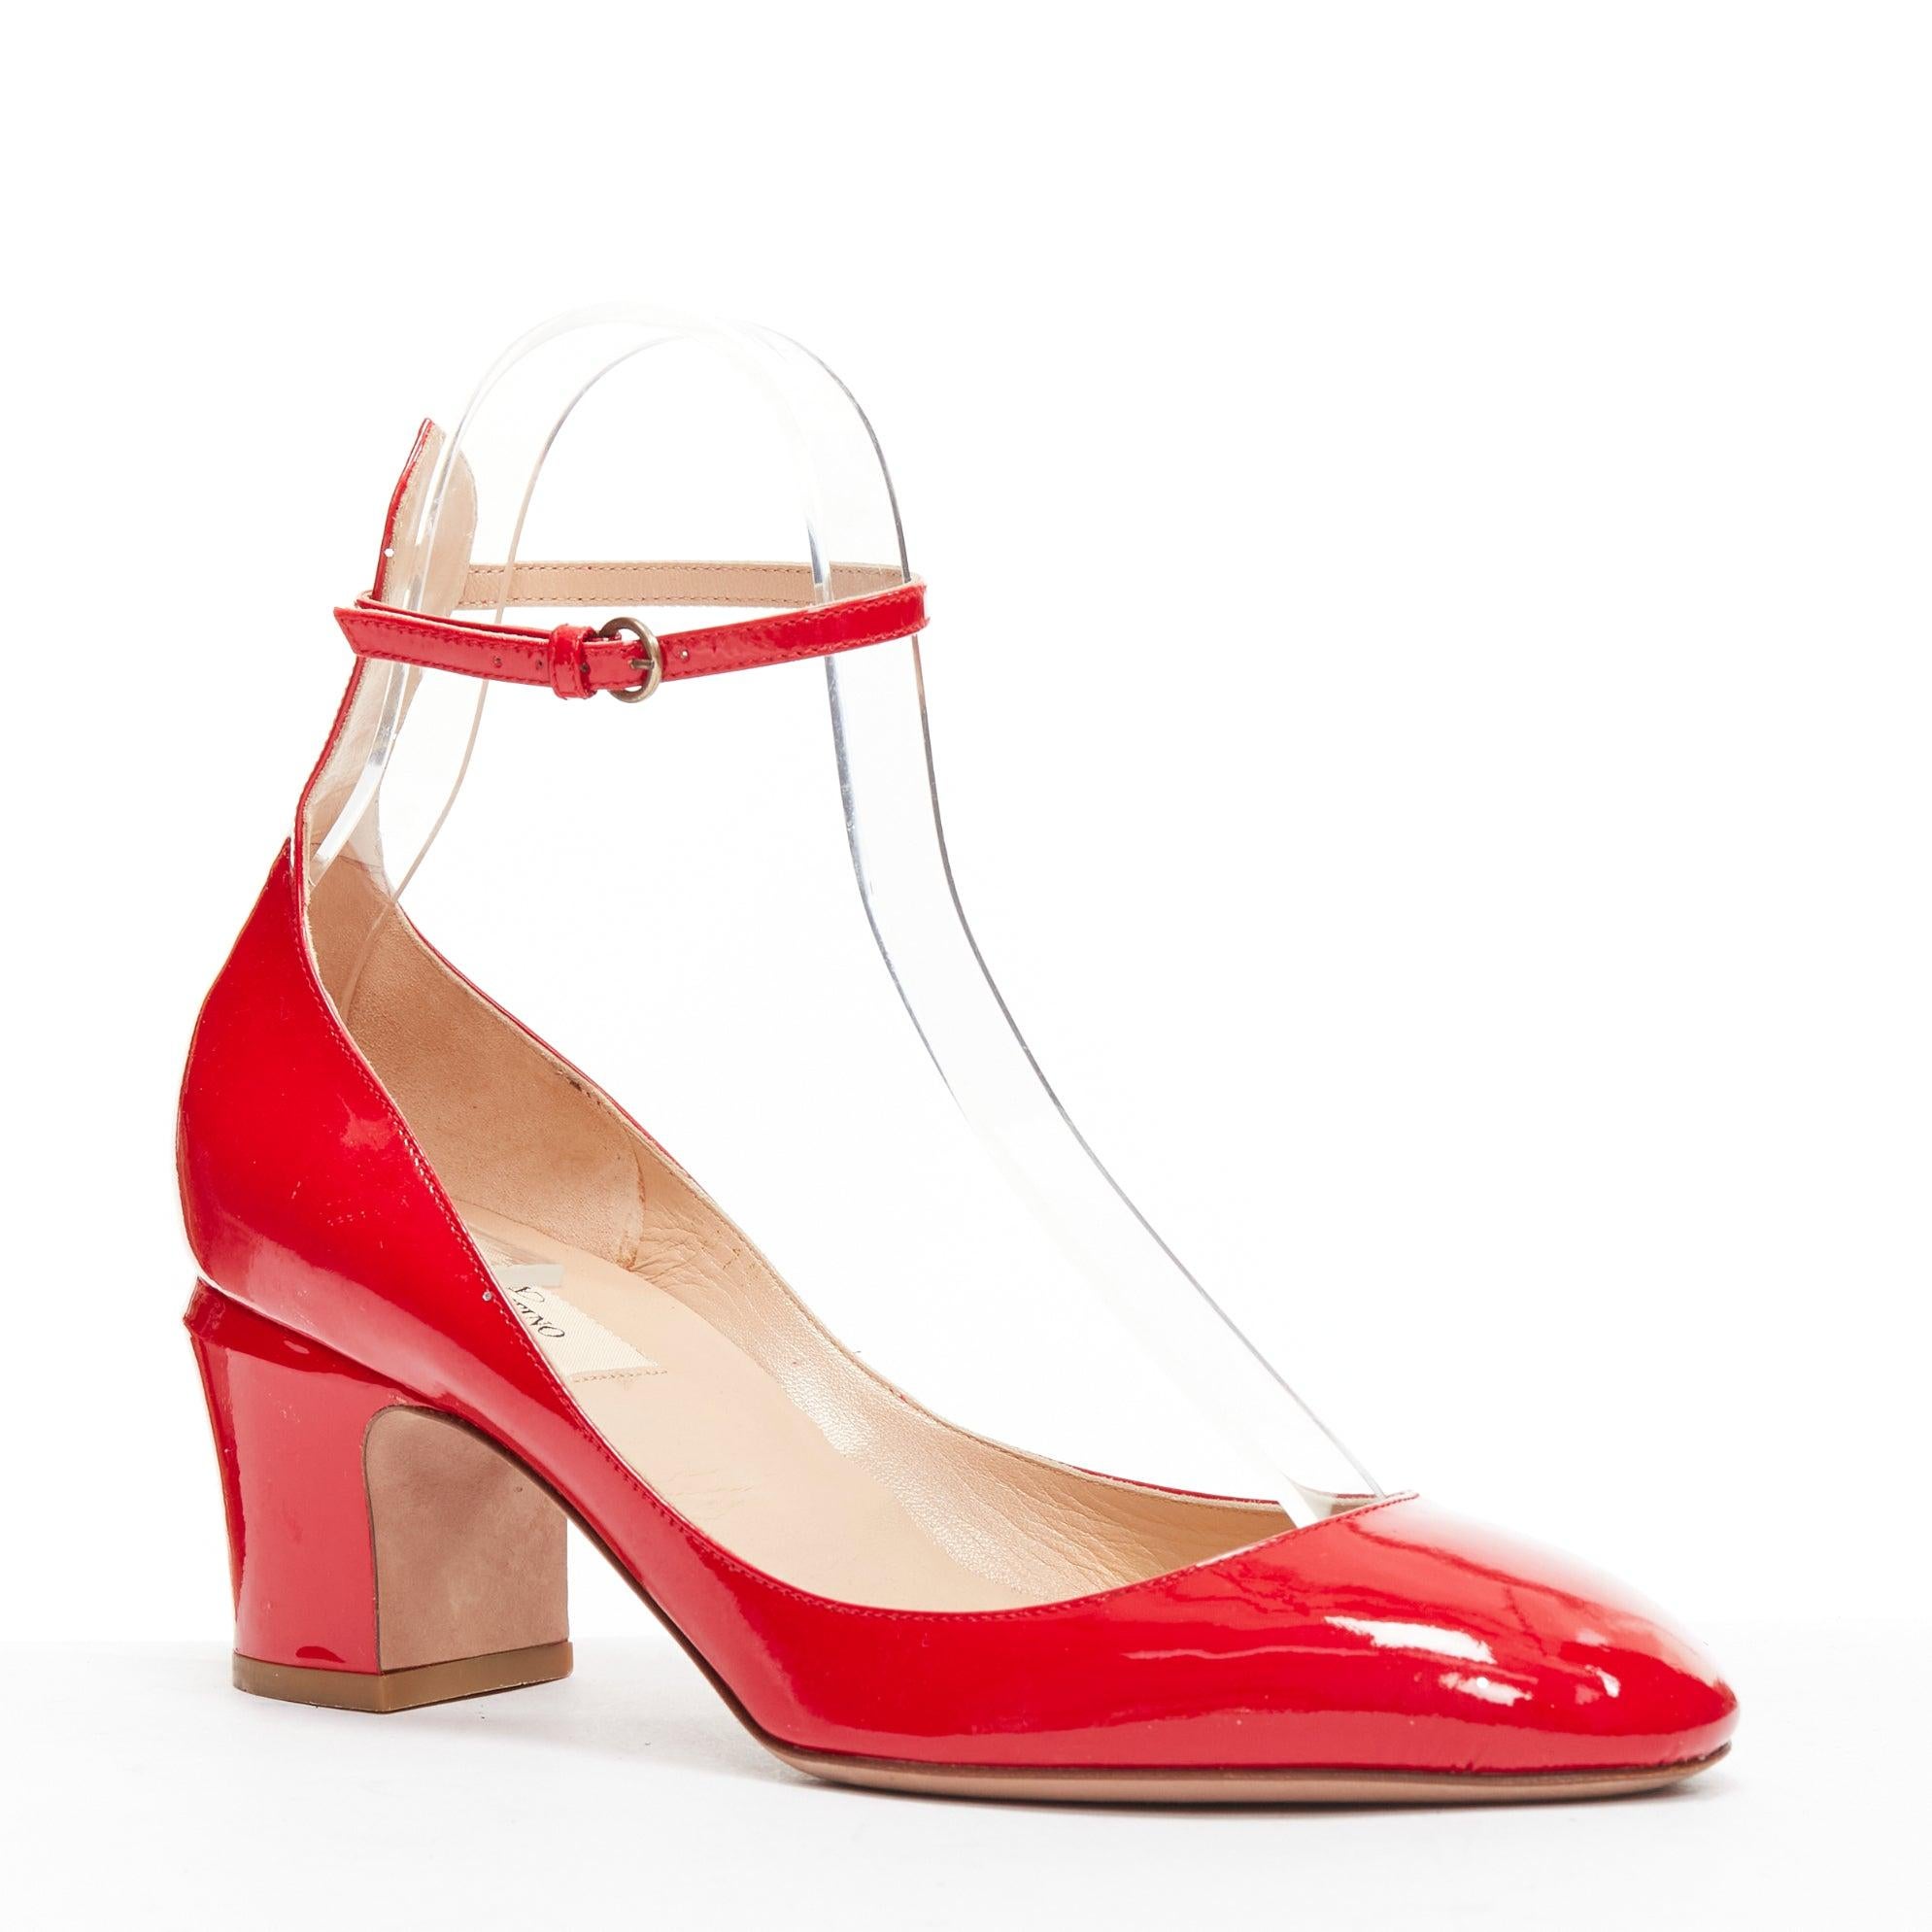 VALENTINO Tango 60 red patent leather Maryjane pumps EU38.5
Reference: BSHW/A00148
Brand: Valentino
Designer: Pier Paolo Piccioli
Model: Tango
Material: Patent Leather
Color: Red
Pattern: Solid
Closure: Ankle Strap
Lining: Nude Leather
Extra